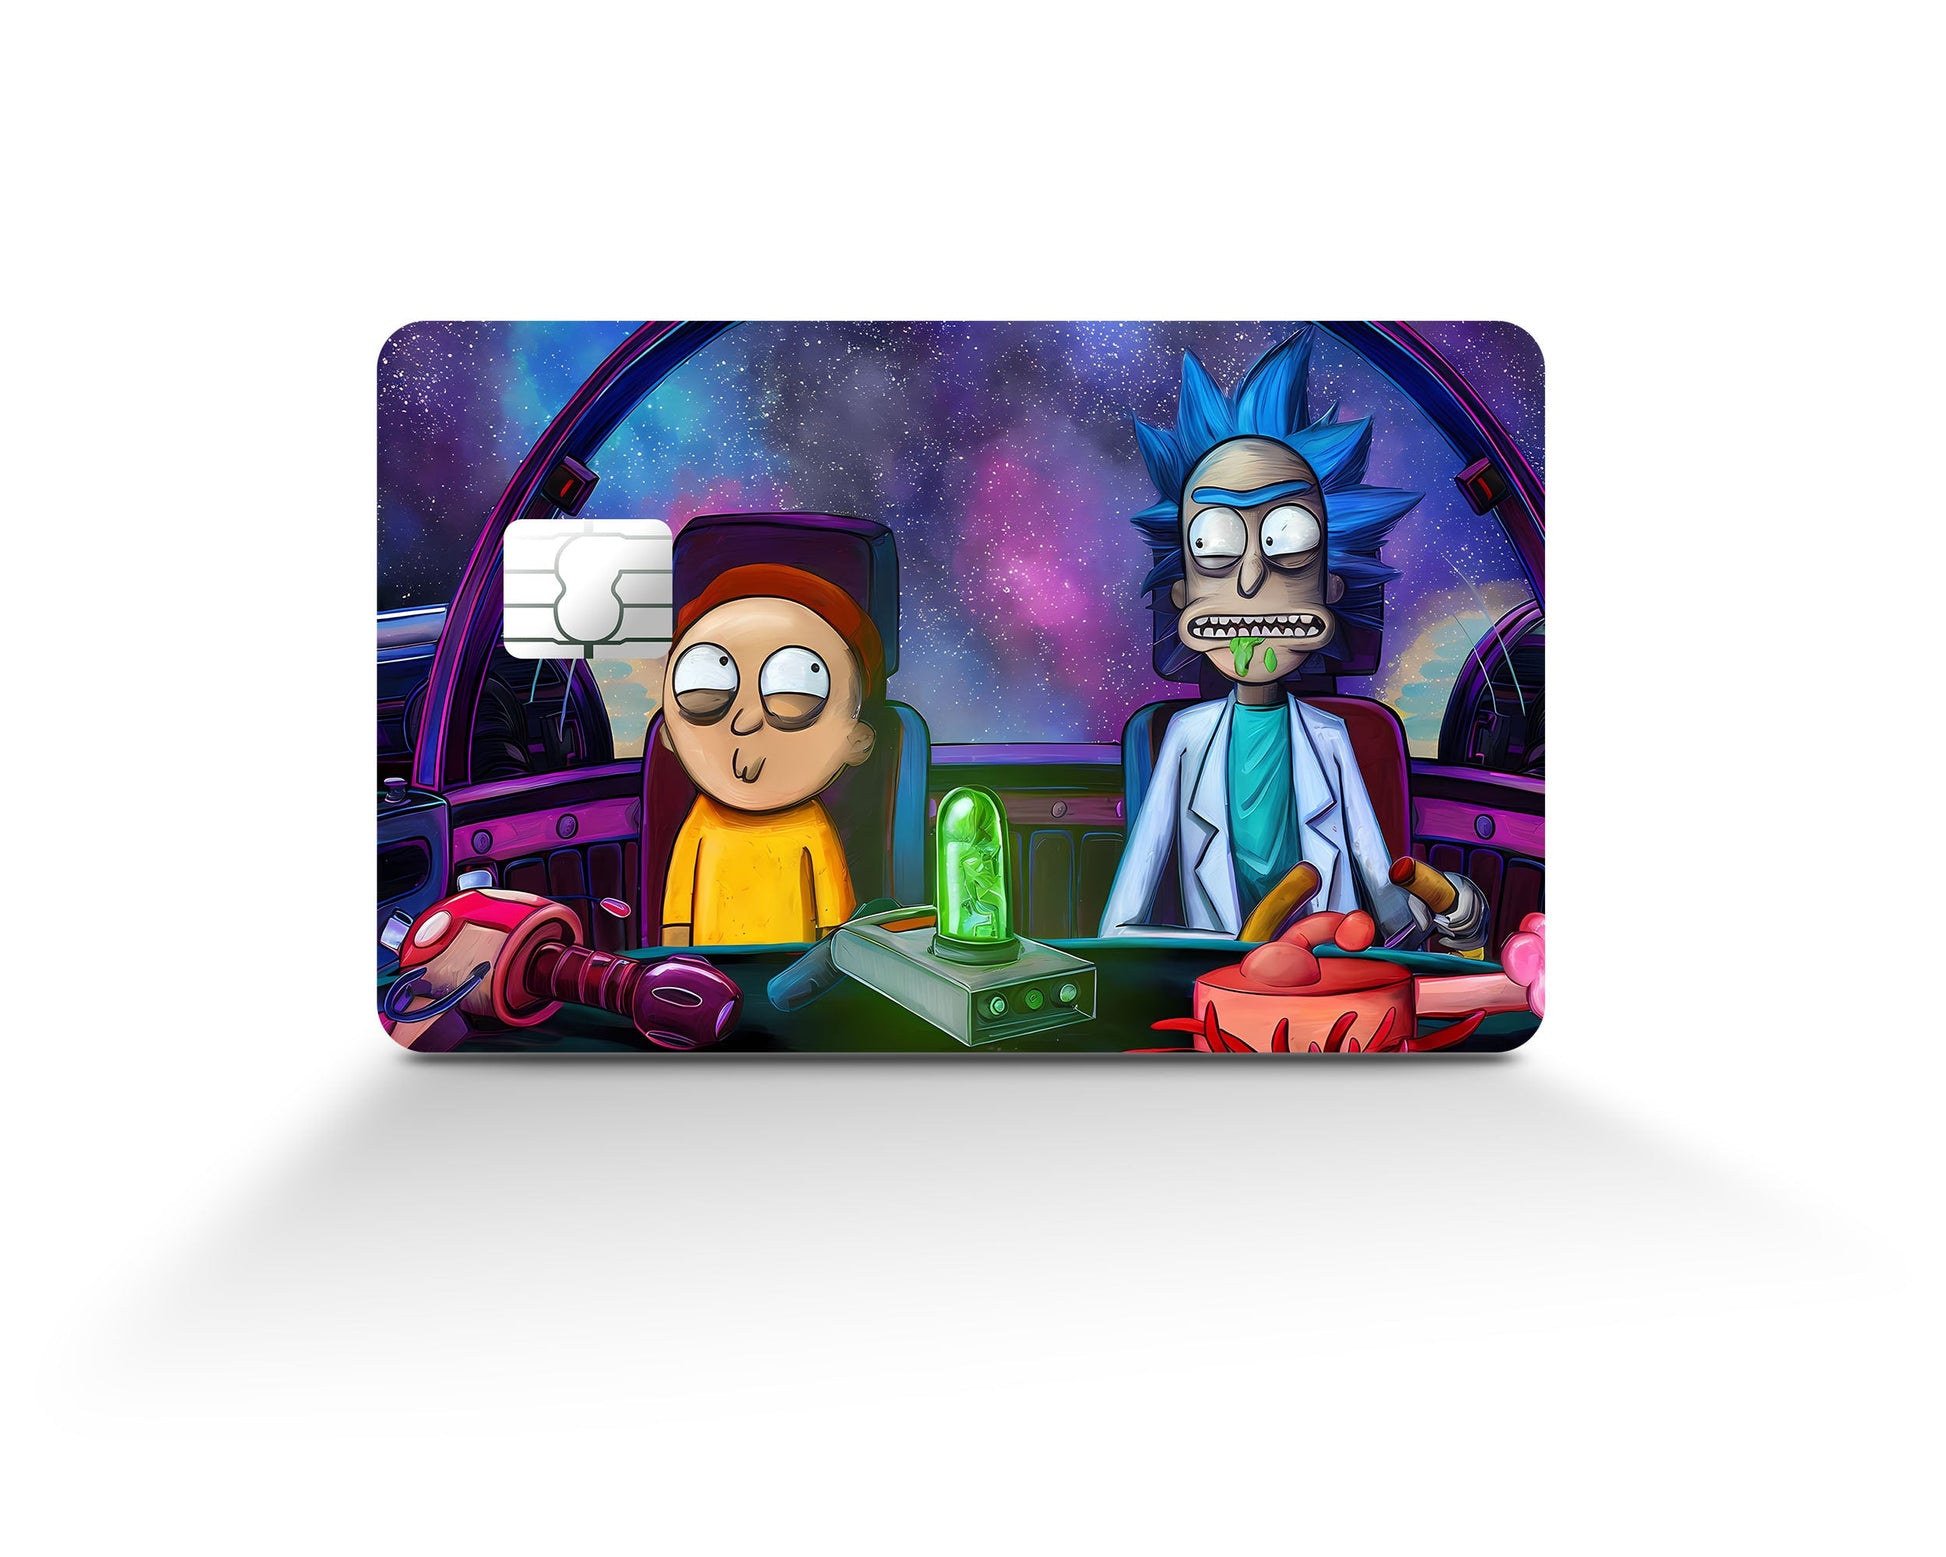 Anime Town Creations Credit Card Rick and Morty Spaceship Full Skins - Anime Rick and Morty Credit Card Skin